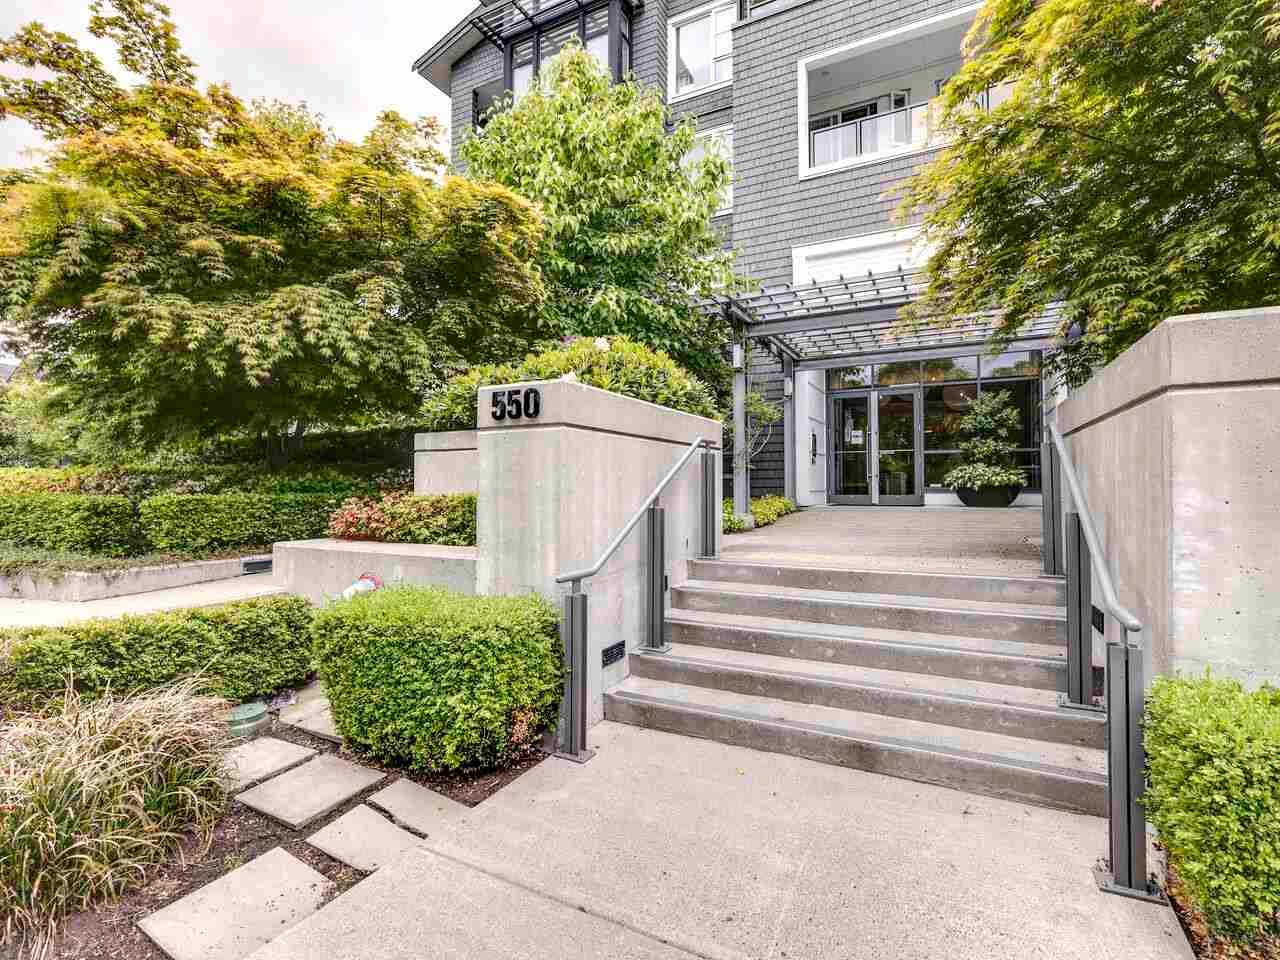 See Ken and Jane's New Listing in Riverwood, Port Coquitlam